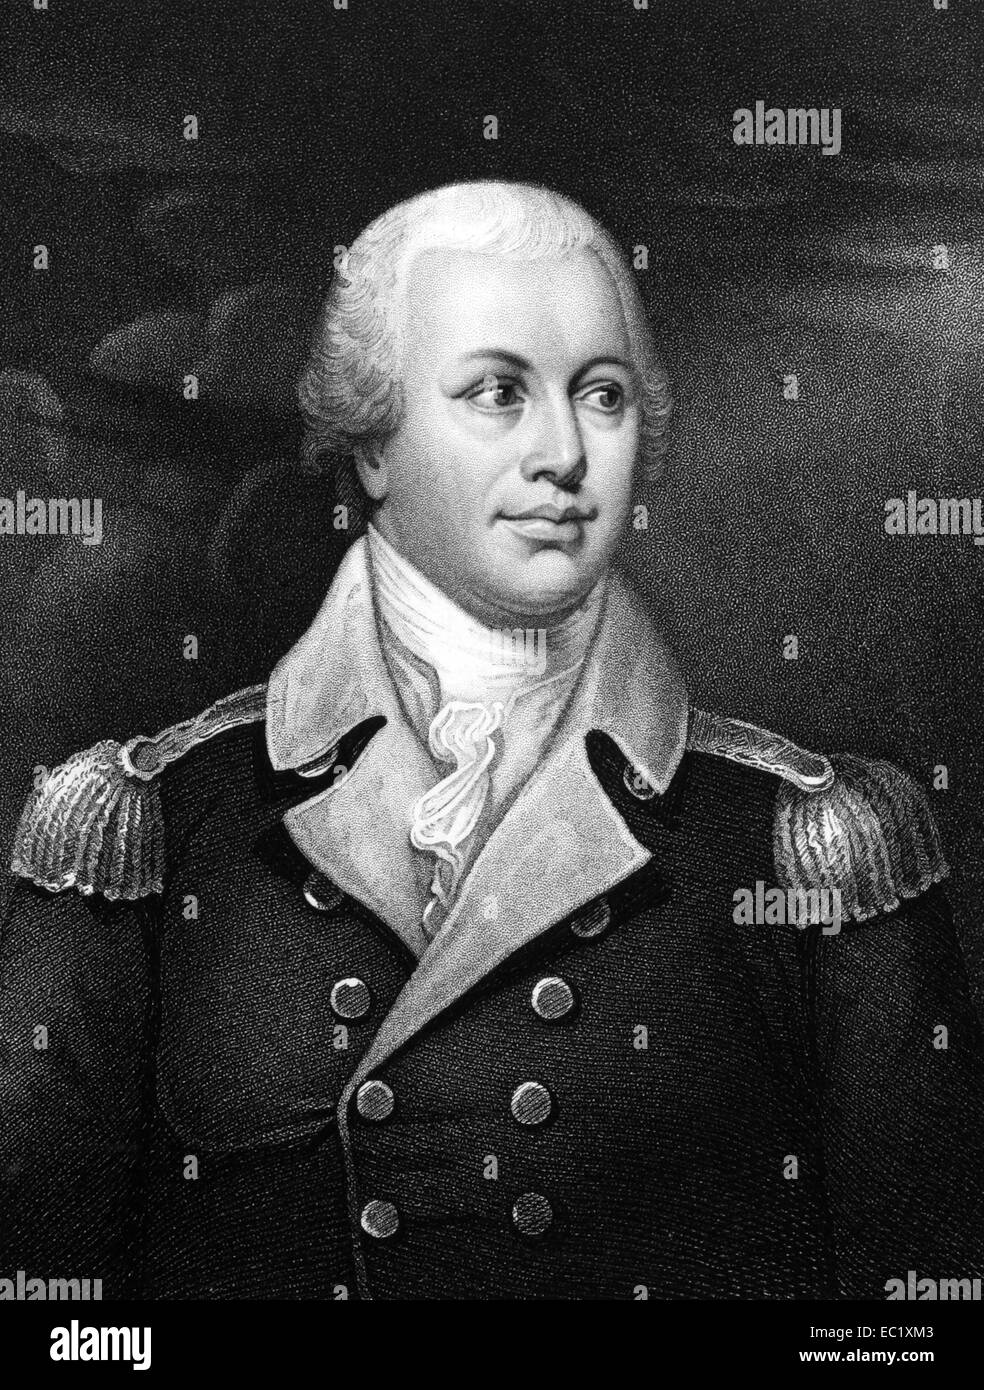 Nathanael Greene (1742-1786) on engraving from 1834.  Major general of the Continental Army in the American Revolutionary War. Stock Photo